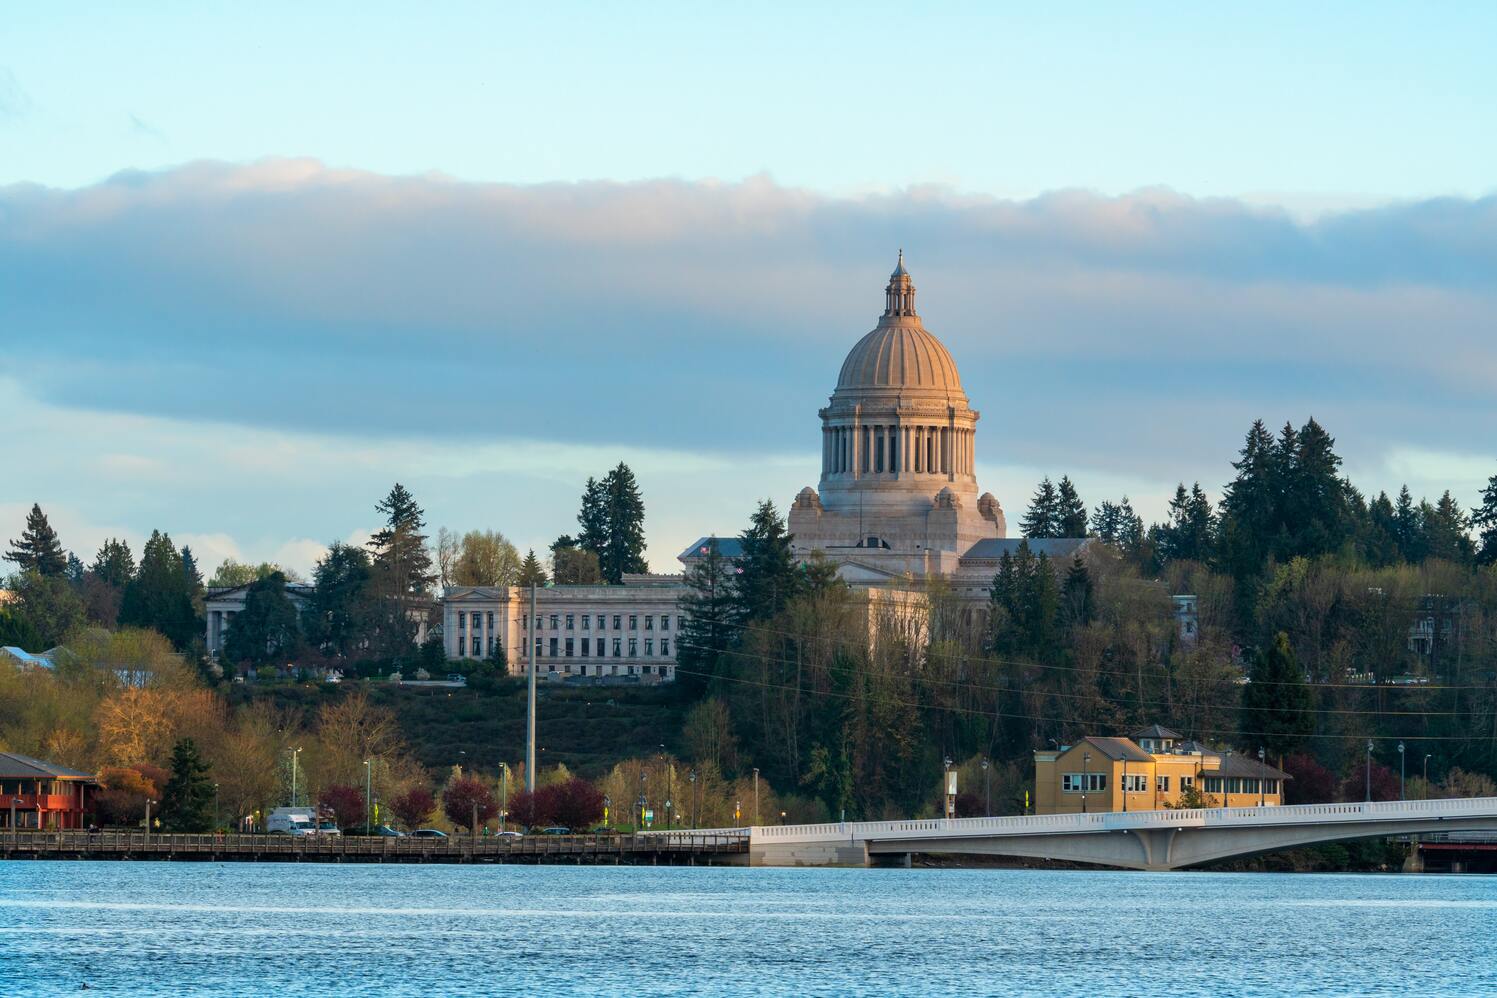 washington state capitol building next to the puget sound